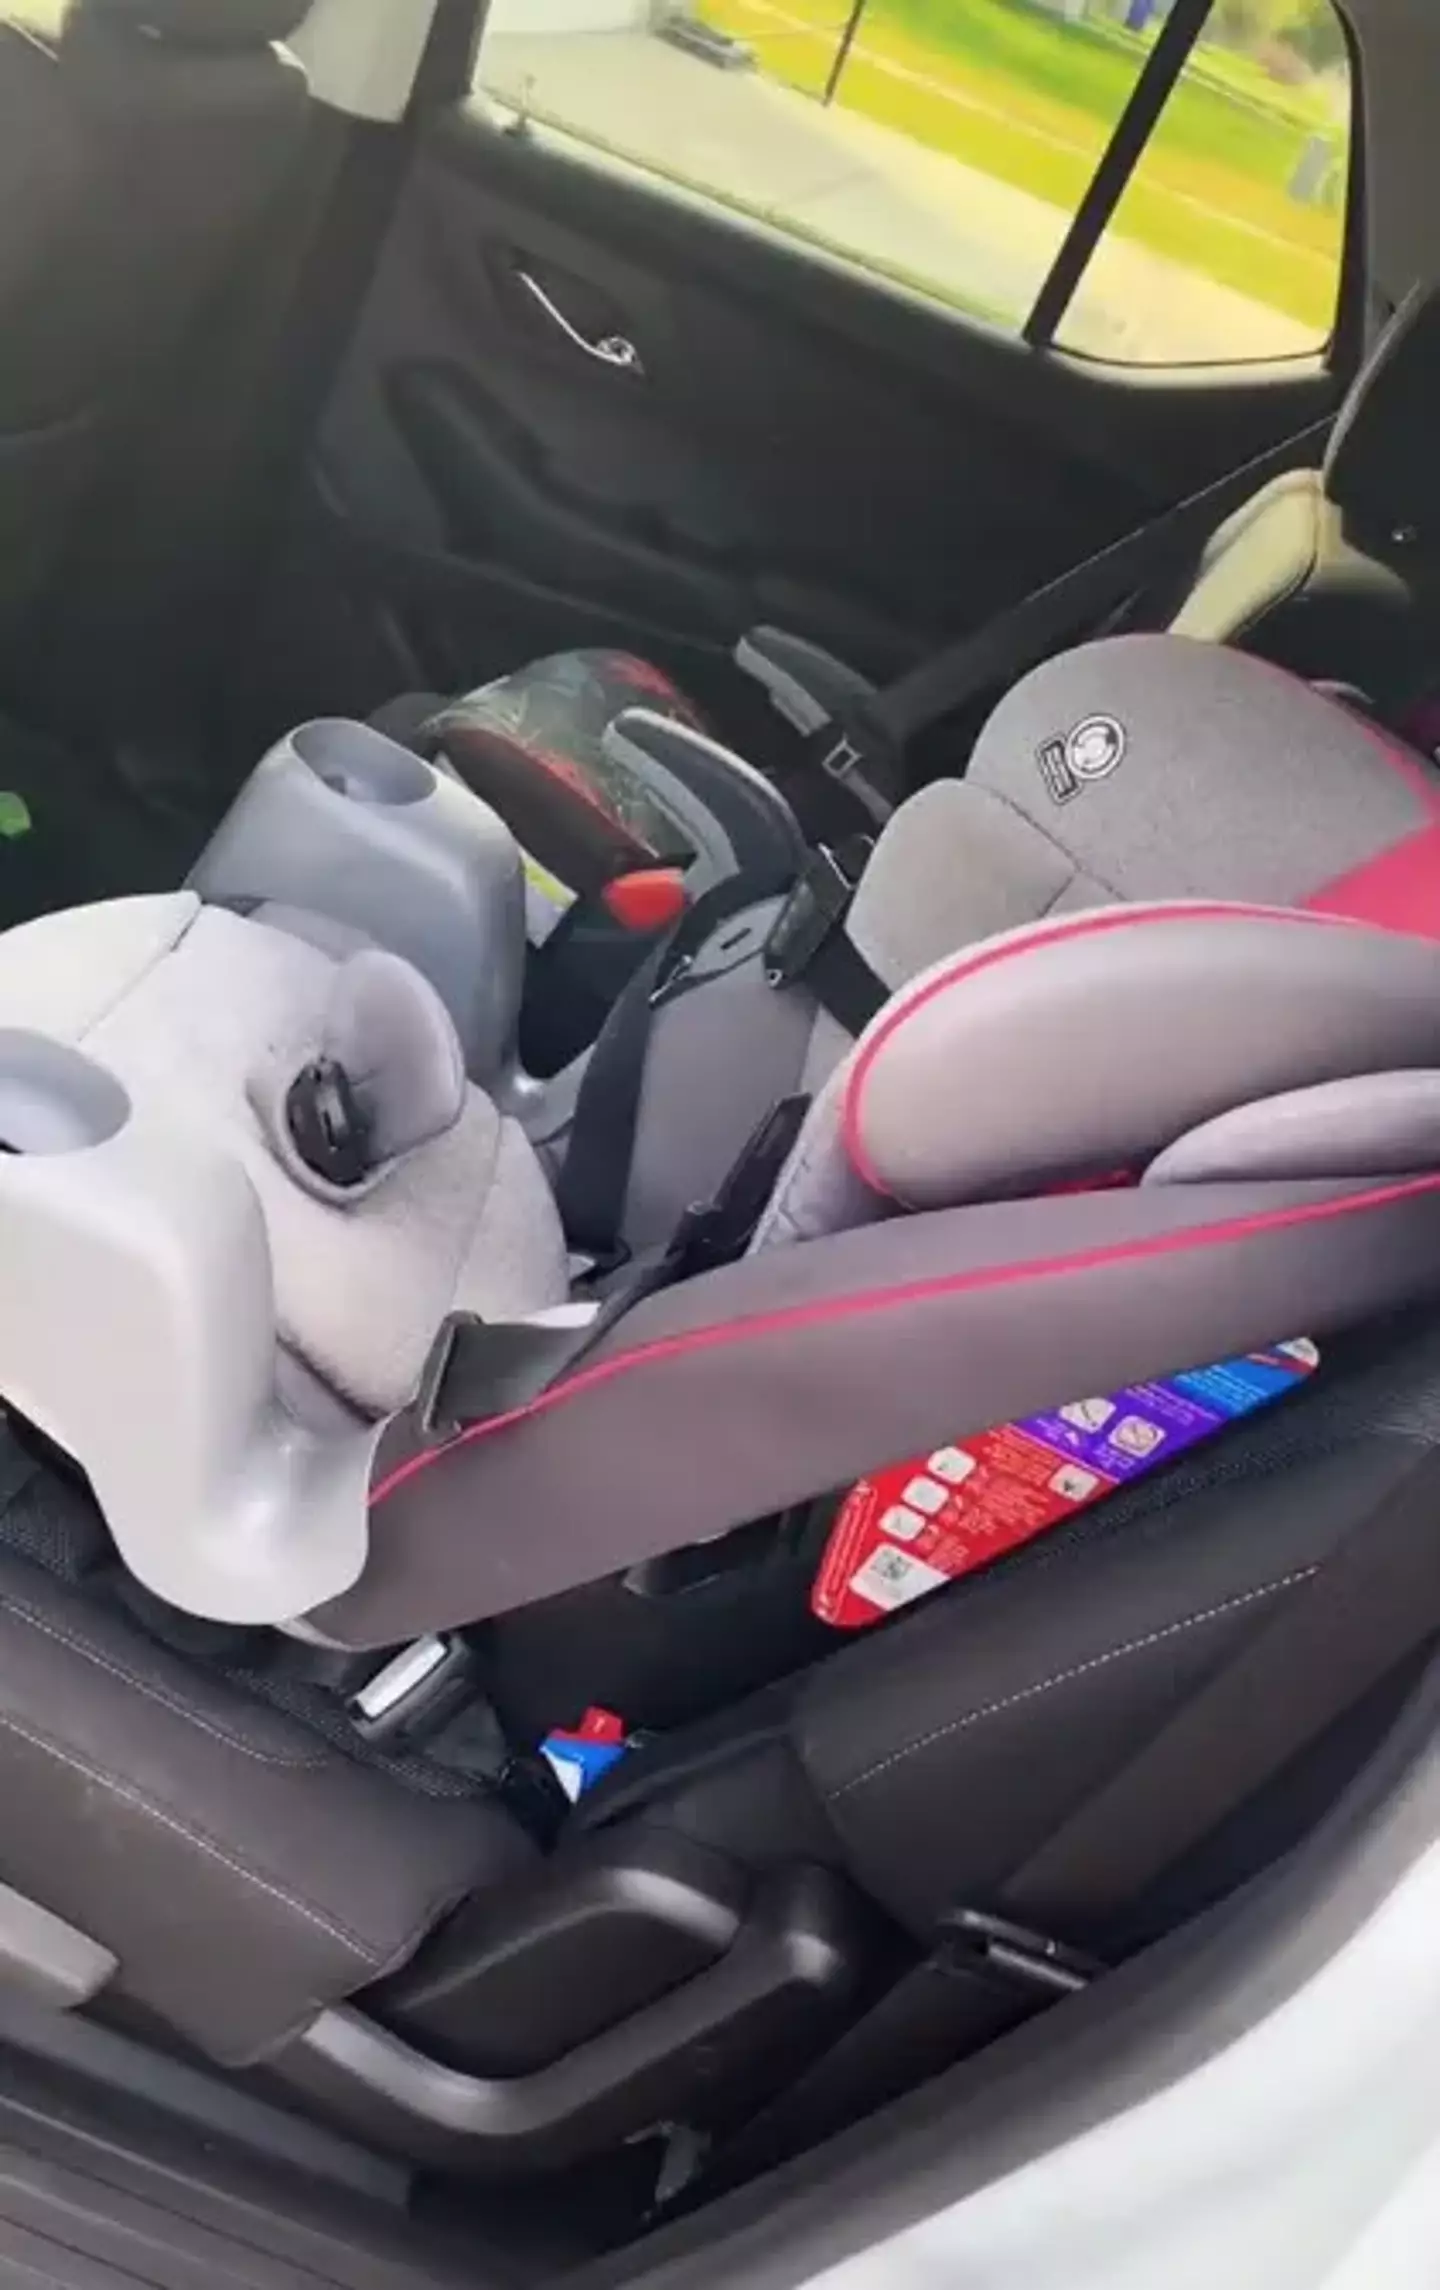 The hidden car seat feature is sure to make the car seat process a whole lot smoother.